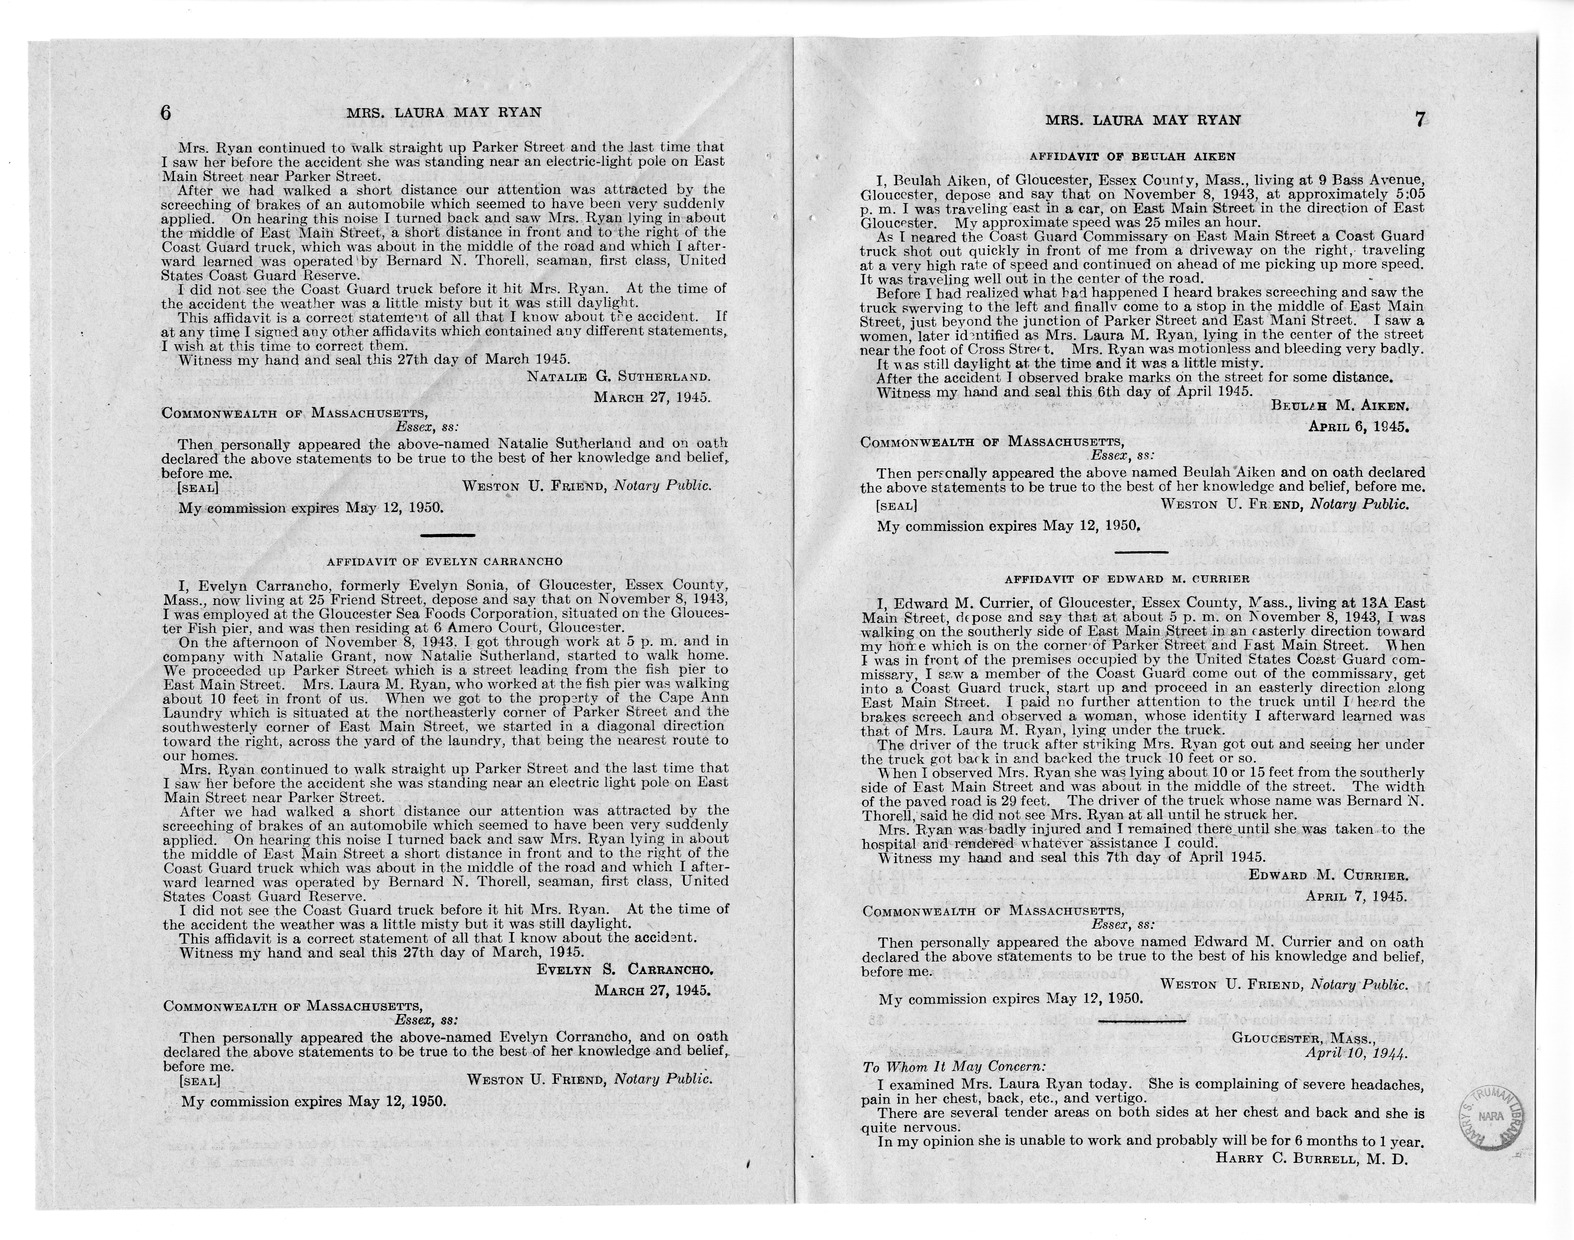 Memorandum from Frederick J. Bailey to M. C. Latta, H.R. 1393, For the Relief of Mrs. Laura May Ryan, with Attachments